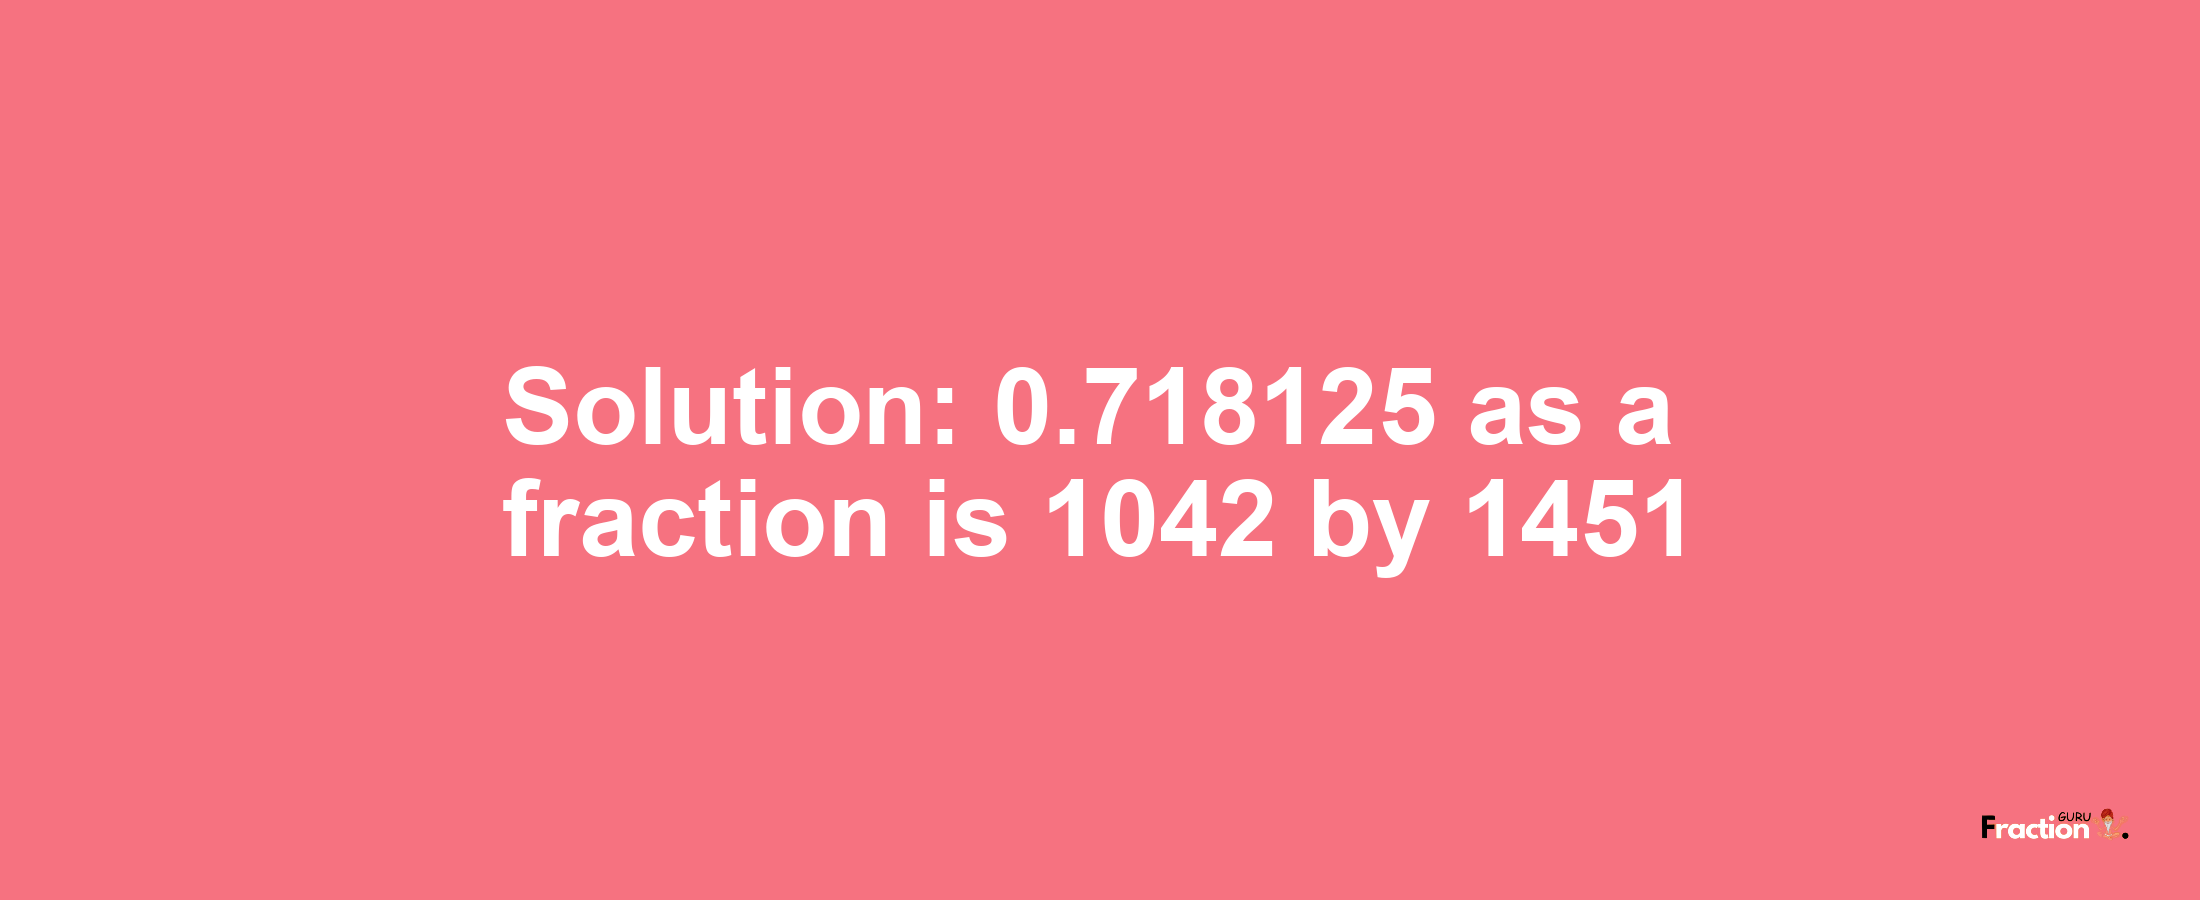 Solution:0.718125 as a fraction is 1042/1451